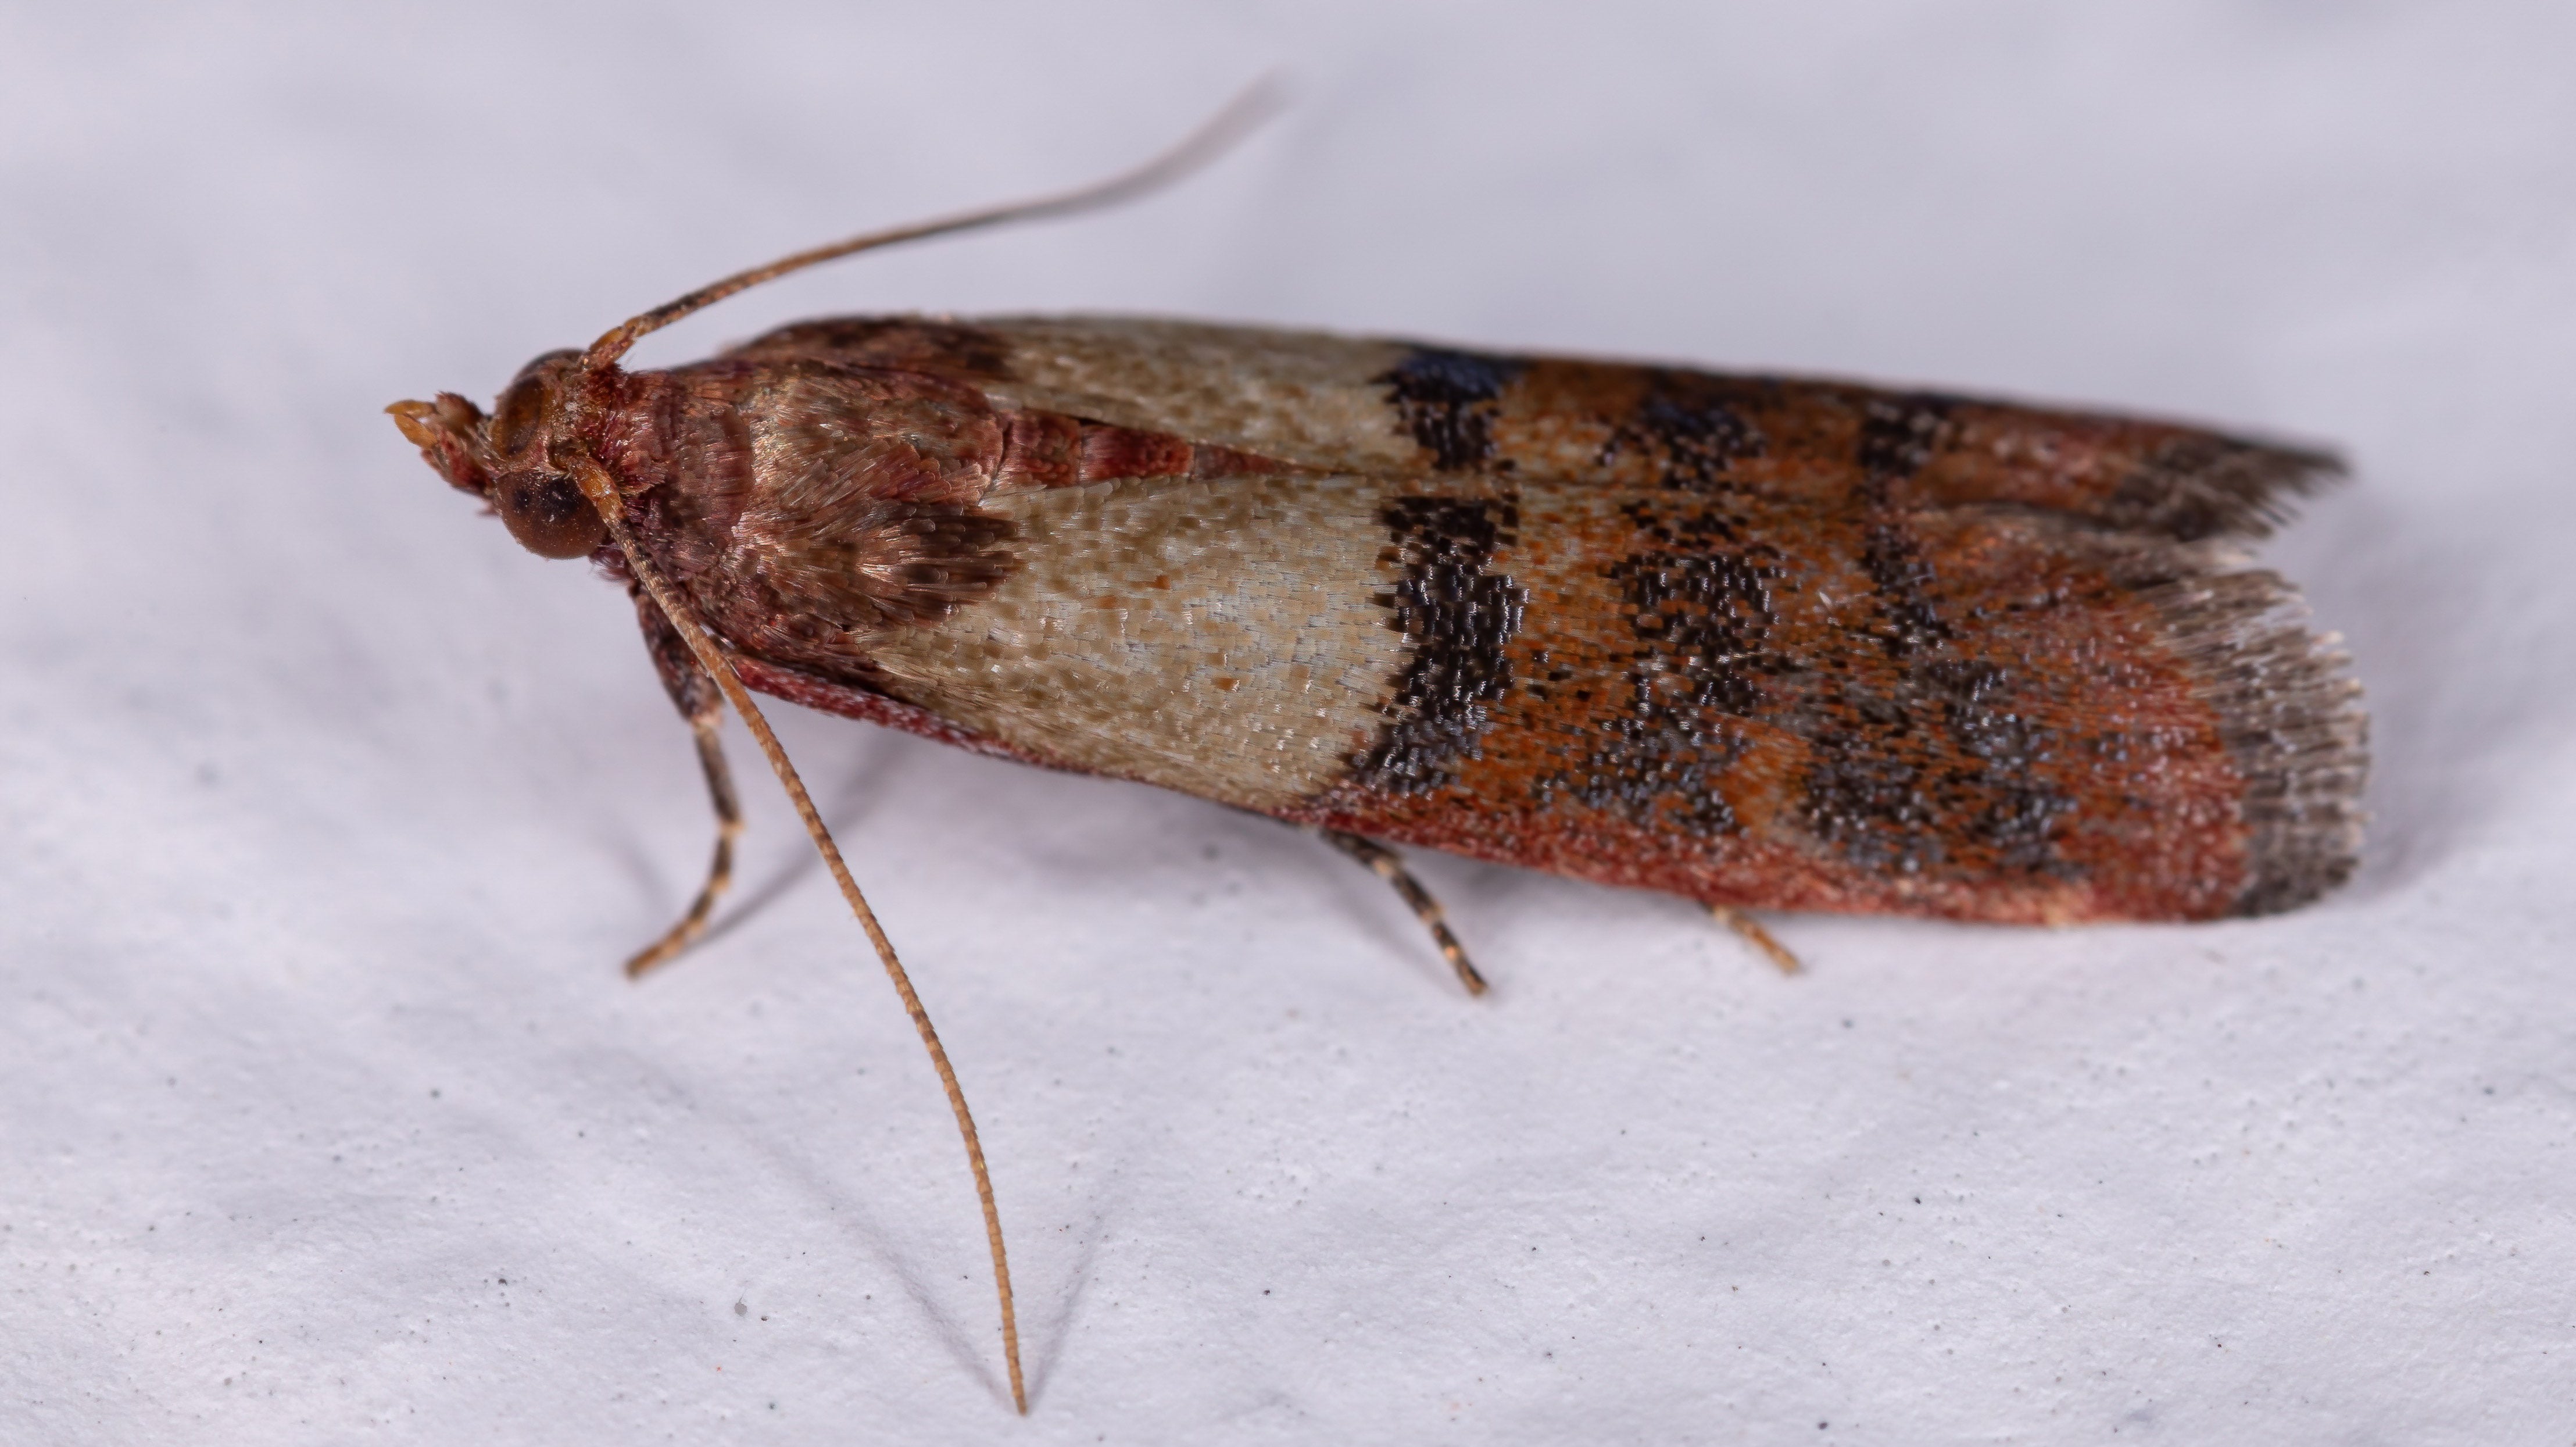 Get to Know More About Pantry Moths - What Do They Like and Where Do They Come From?